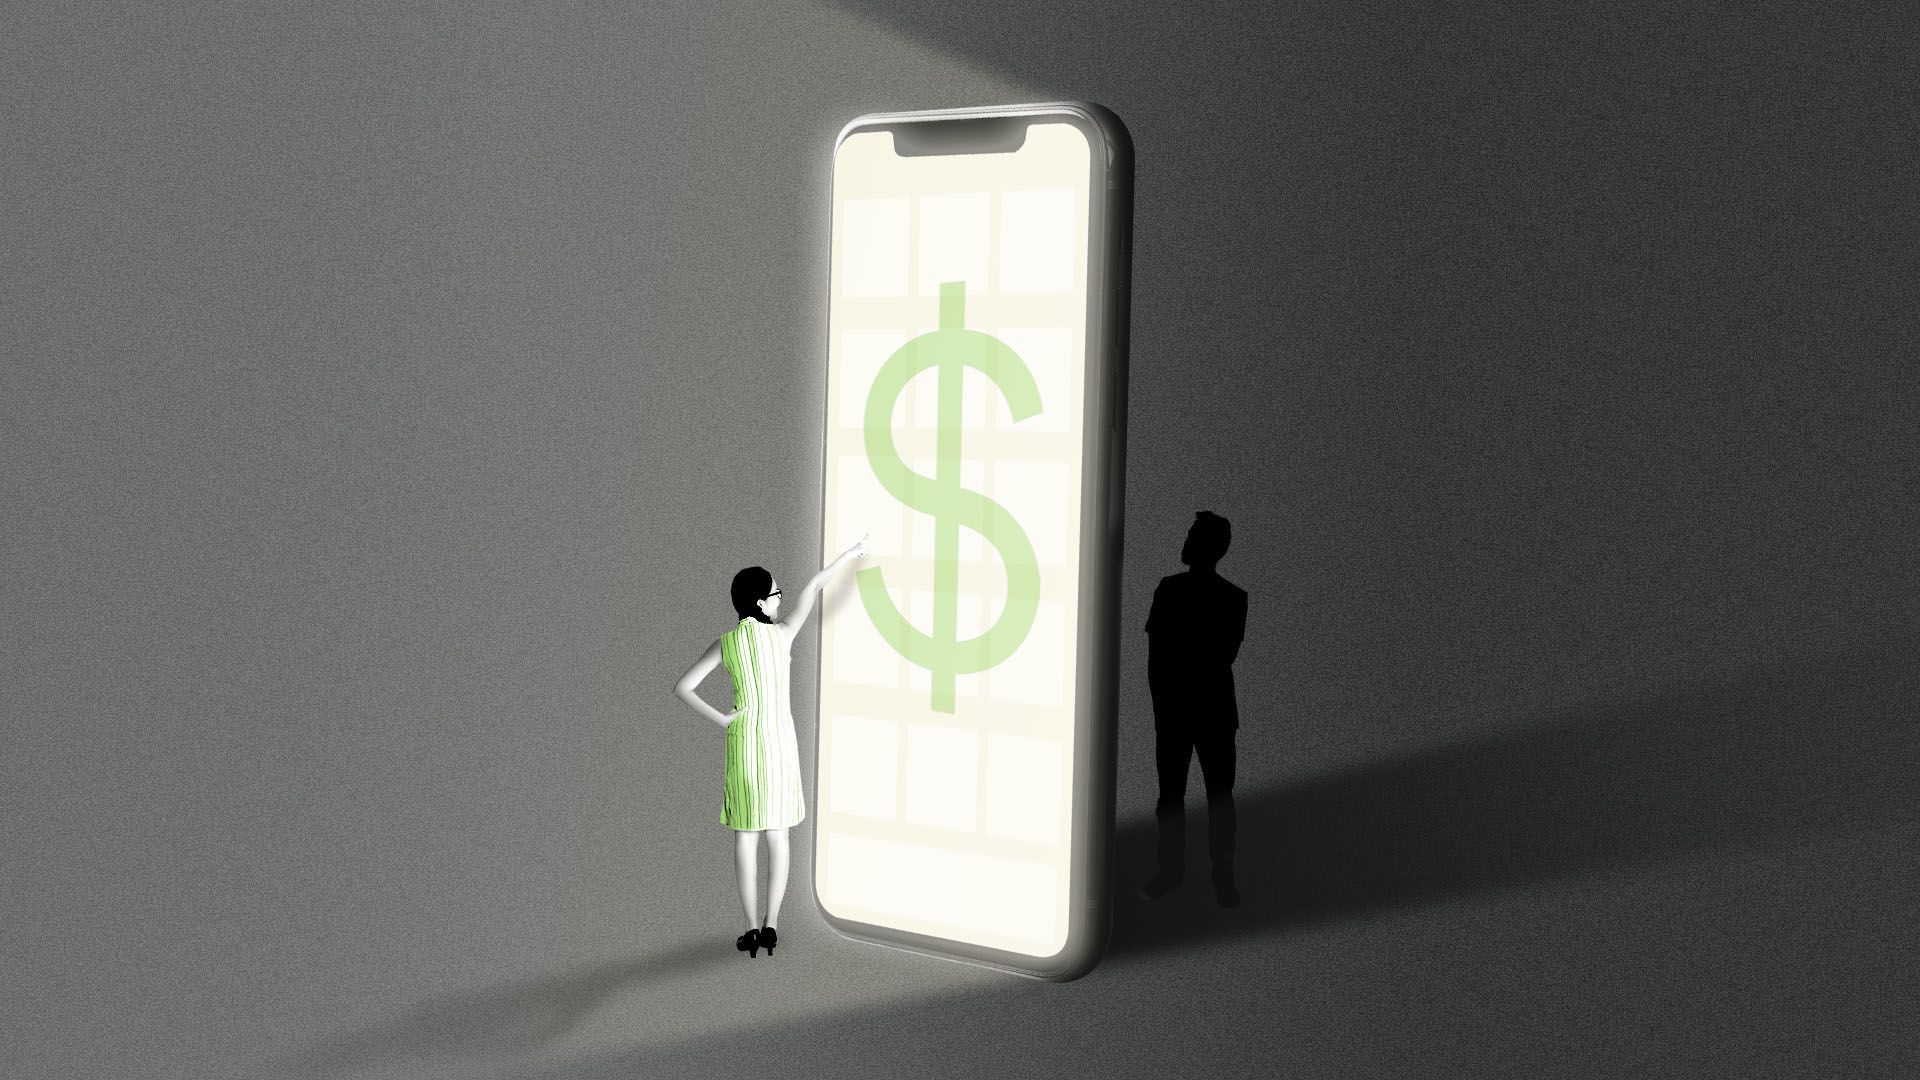 An illustration showing two people on the side of a smartphone with a dollar sign, one in the light, the other in the dark